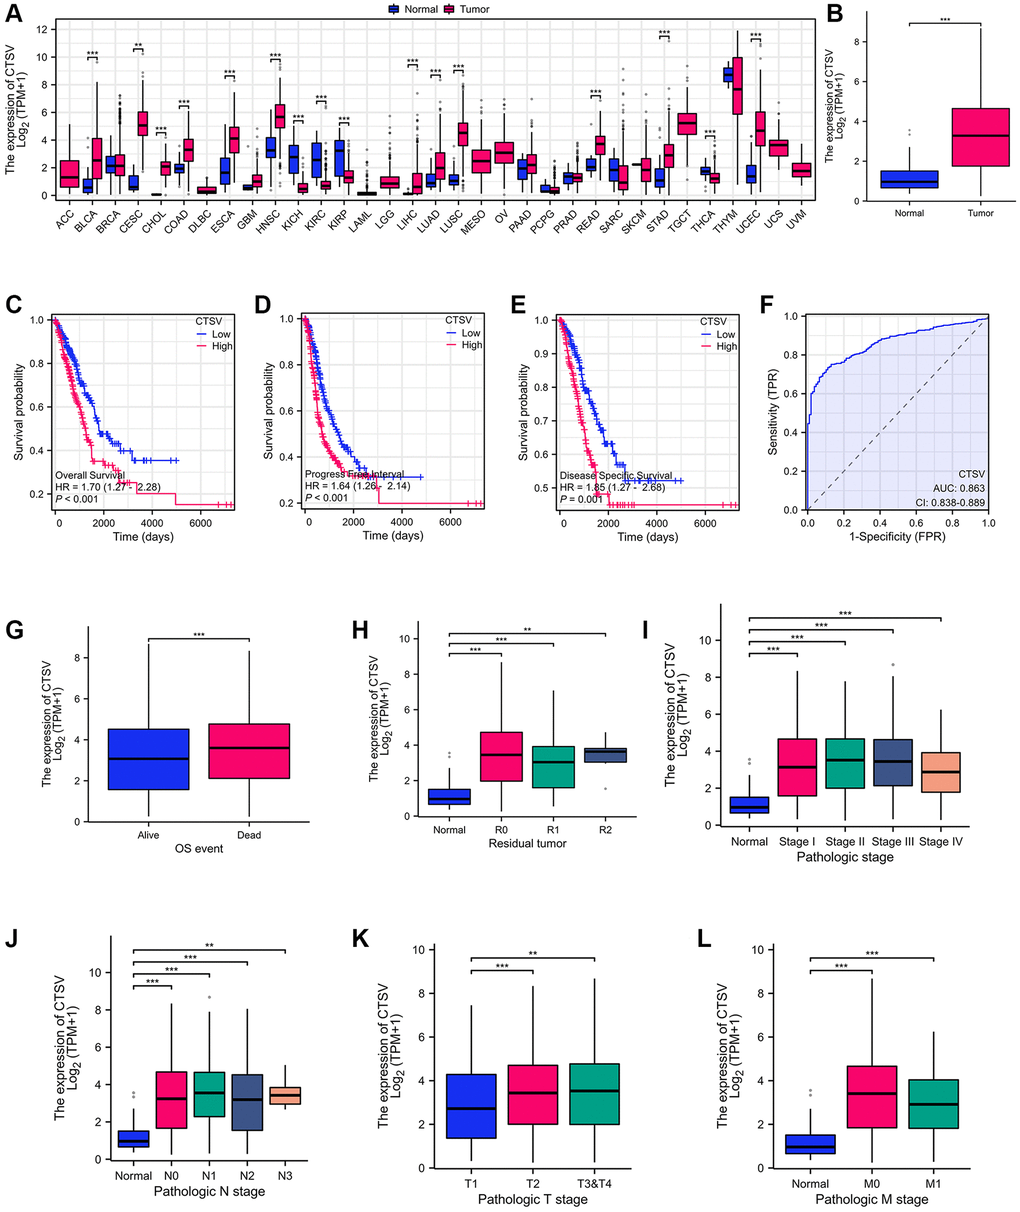 Identification of CTSV as the driver for malignant progression of lung cancer. (A) CTSV expression analysis in pan-cancer using tumor tissues paired with normal tissues from the TCGA database. (B) CTSV expression analysis of lung cancer using lung cancer and normal samples from the TCGA database. (C–E) Kaplan-Meier survival curves based on CTSV expression in the lung cancer samples. (F) ROC analysis of lung cancer based on CTSV expression. (G, H) The expression of CTSV was analyzed based on OS events and residual tumor. (I–L) Relationship between CTSV expression and clinical outcomes including (I) Pathologic stage, (J) N stage, (K) T stage, (L) M stage. *P **P ***P 